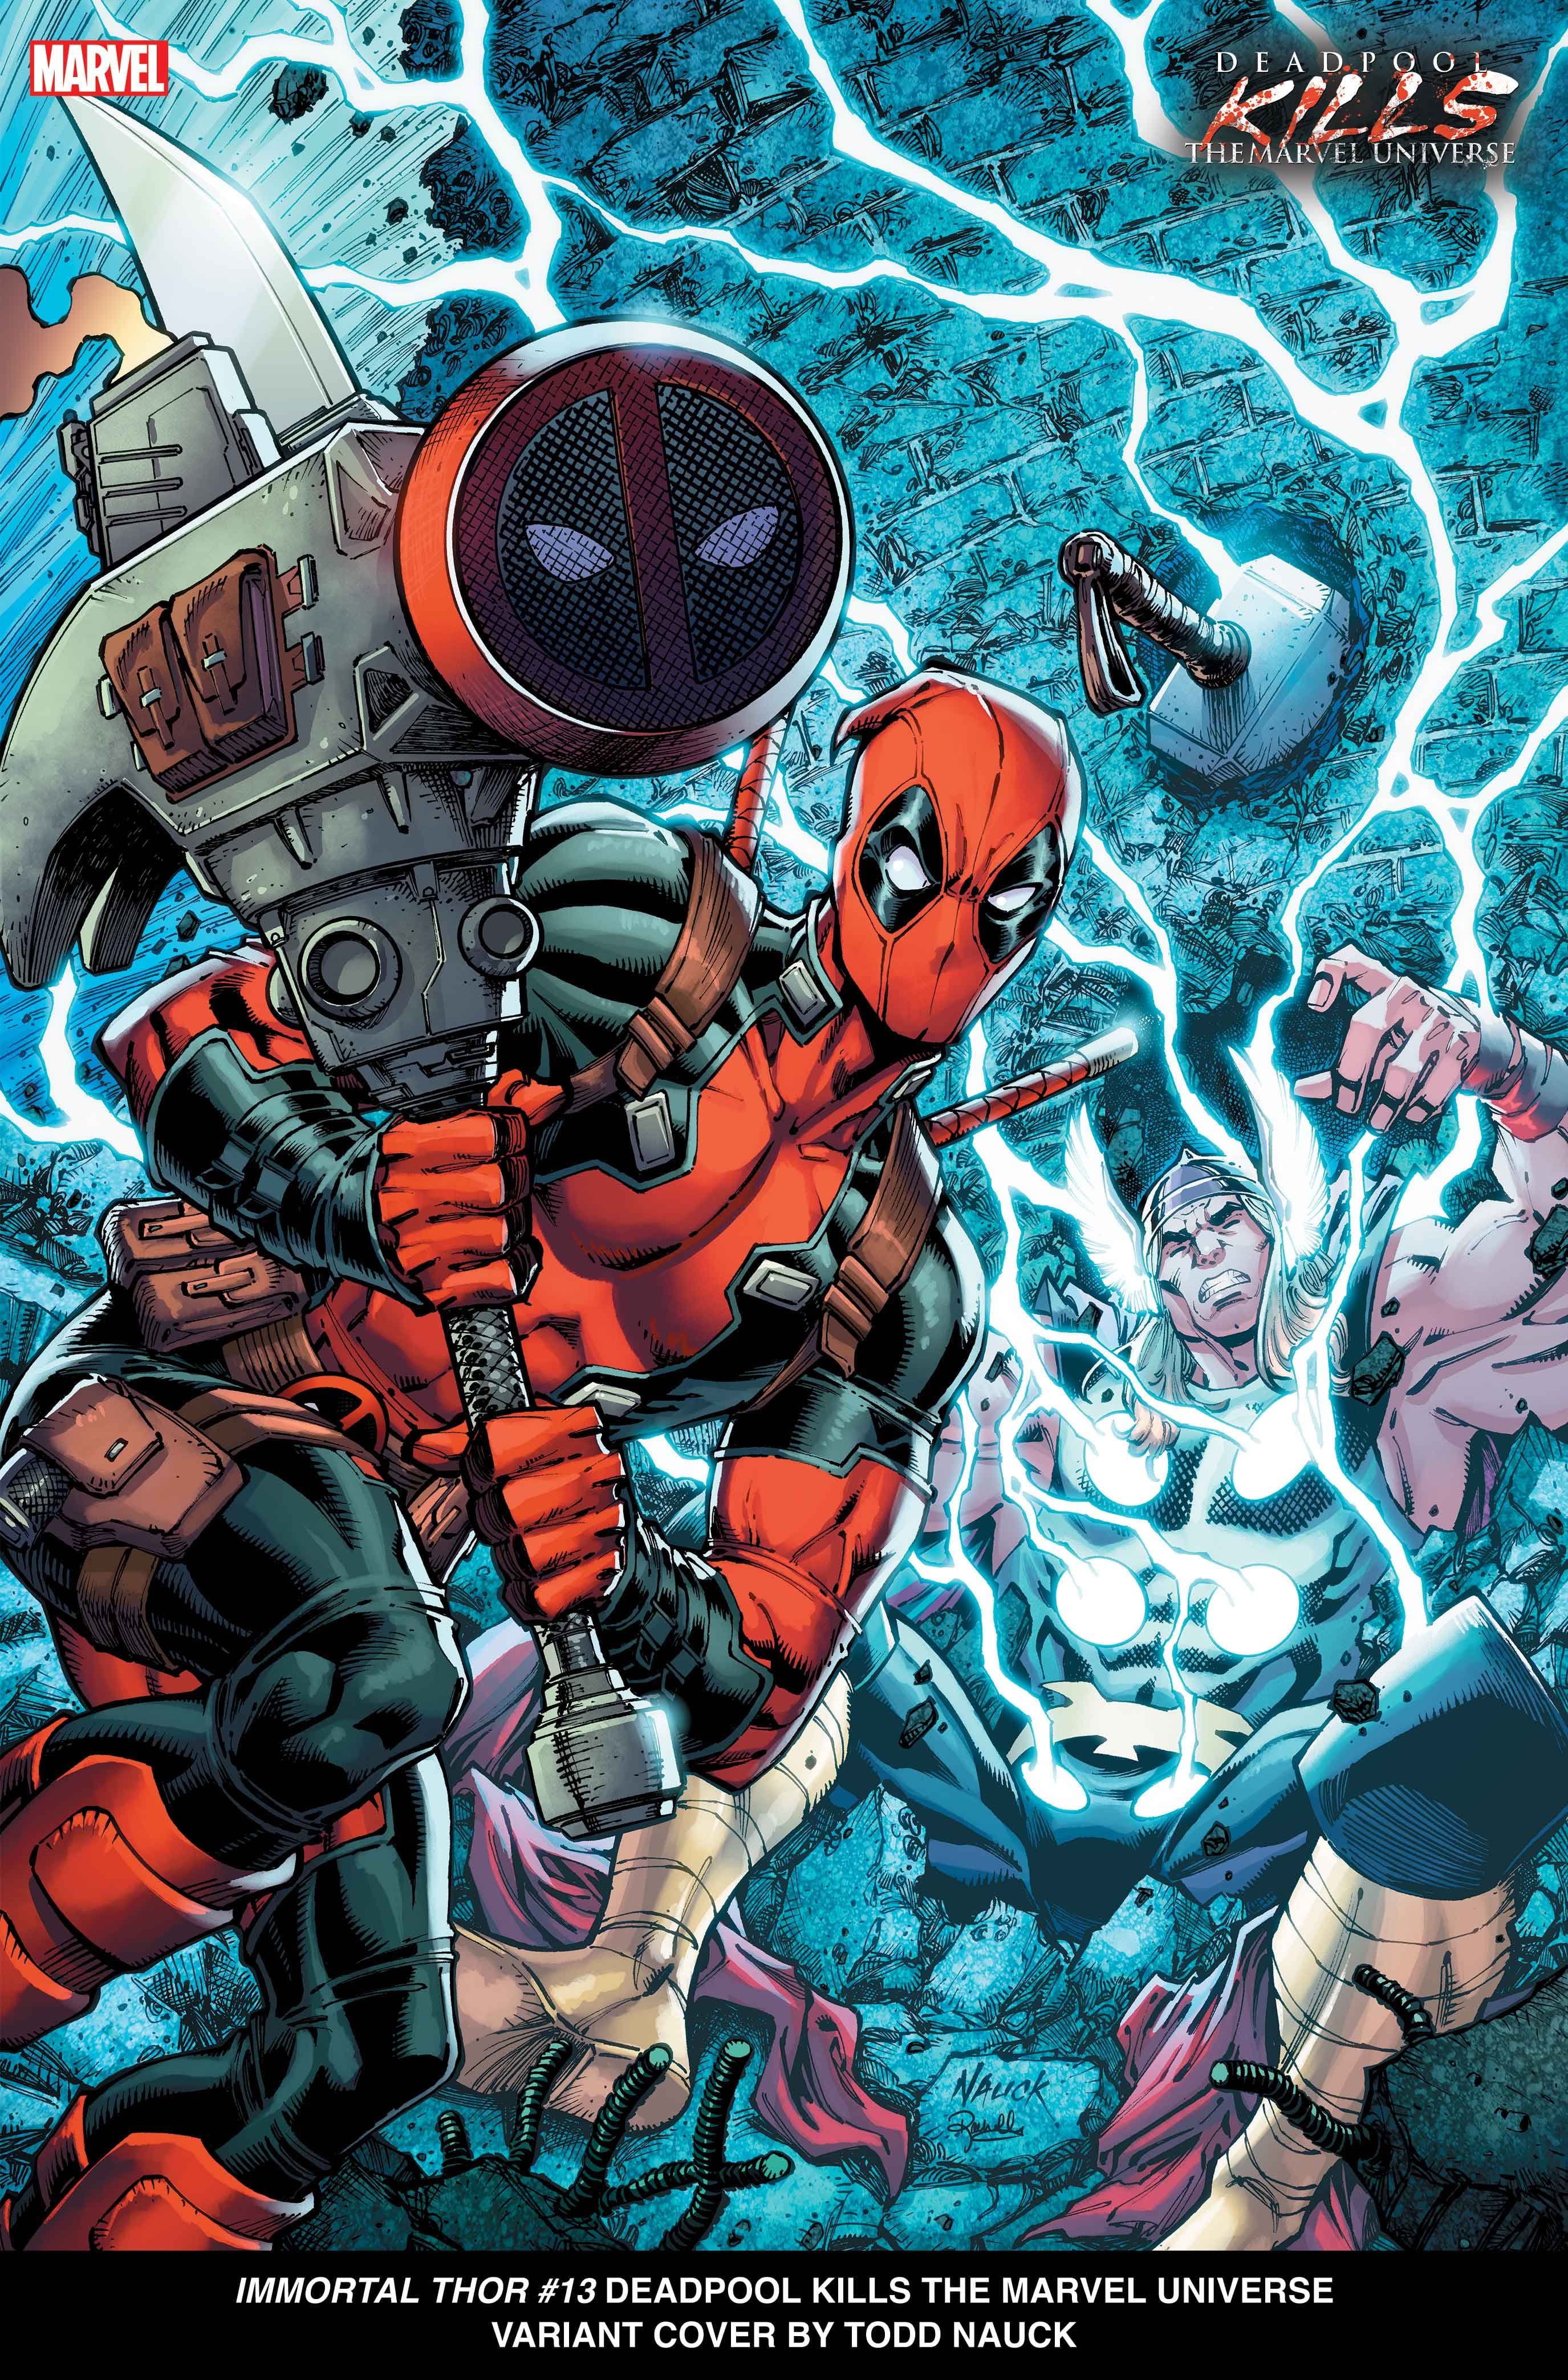 IMMORTAL THOR #13 Deadpool Kills the Marvel Universe Variant Cover by Todd Nauck